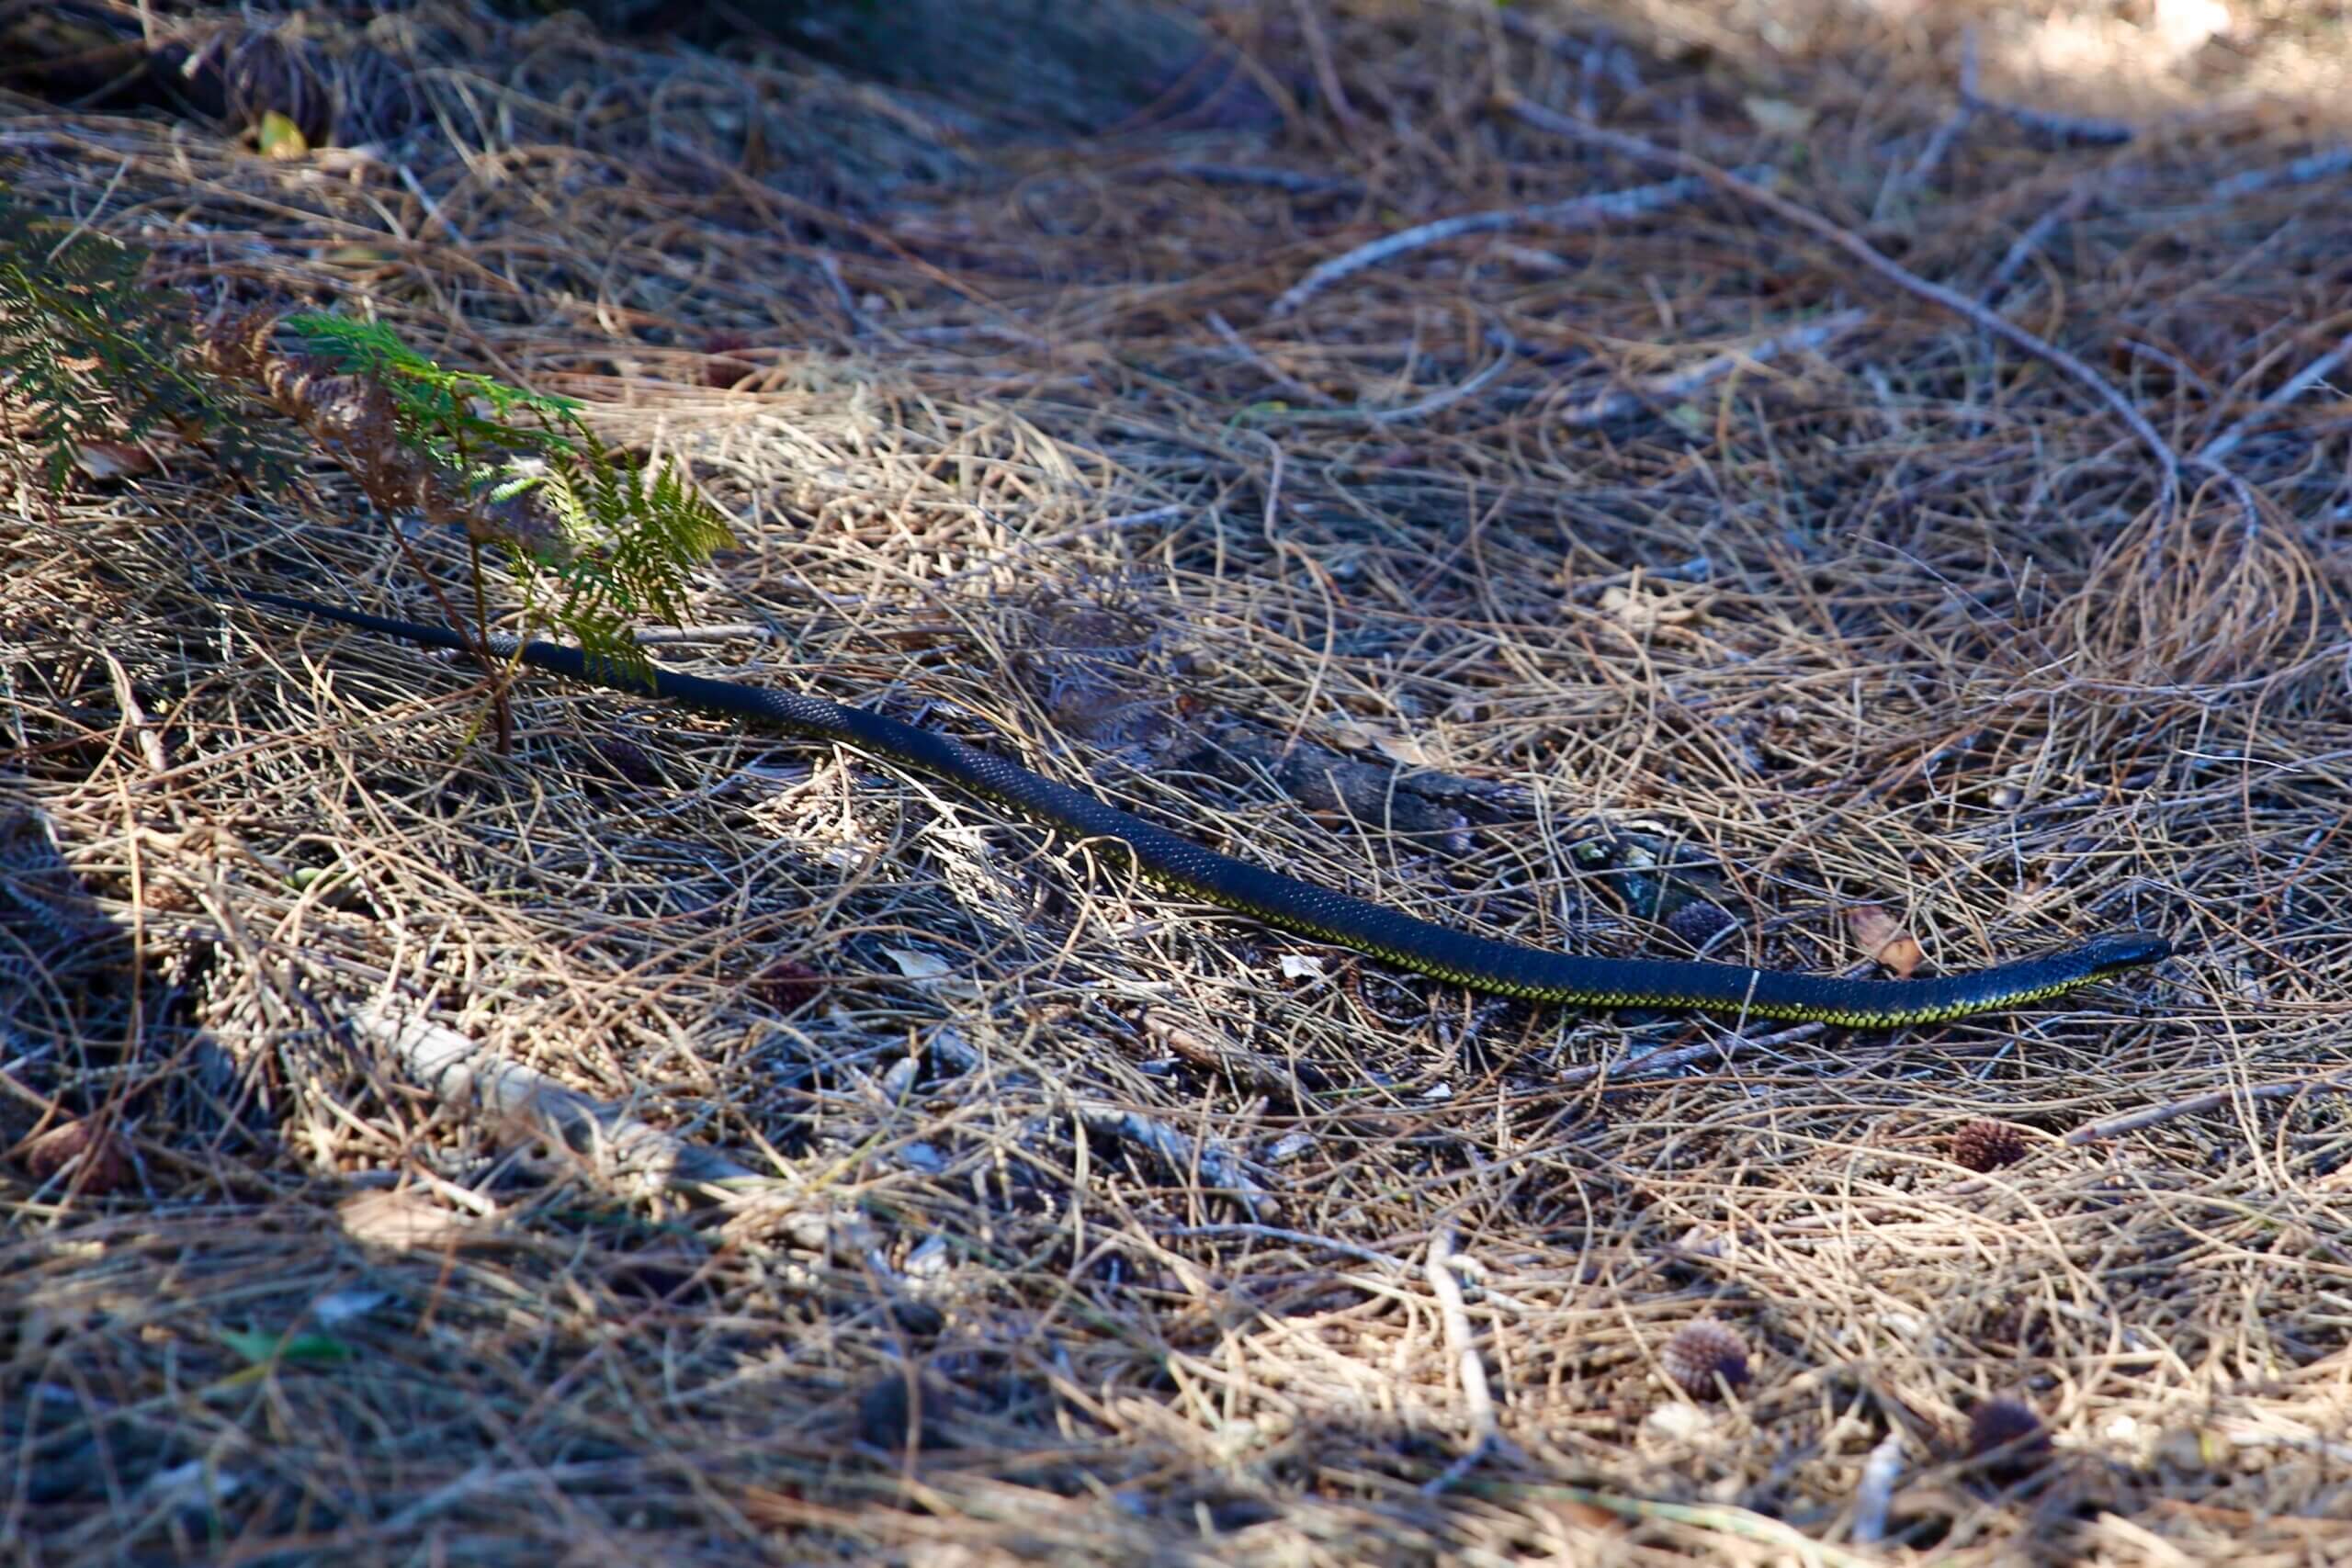 A yellow-bellied black snake at the Narawntapu National Park which is located on the north coast.